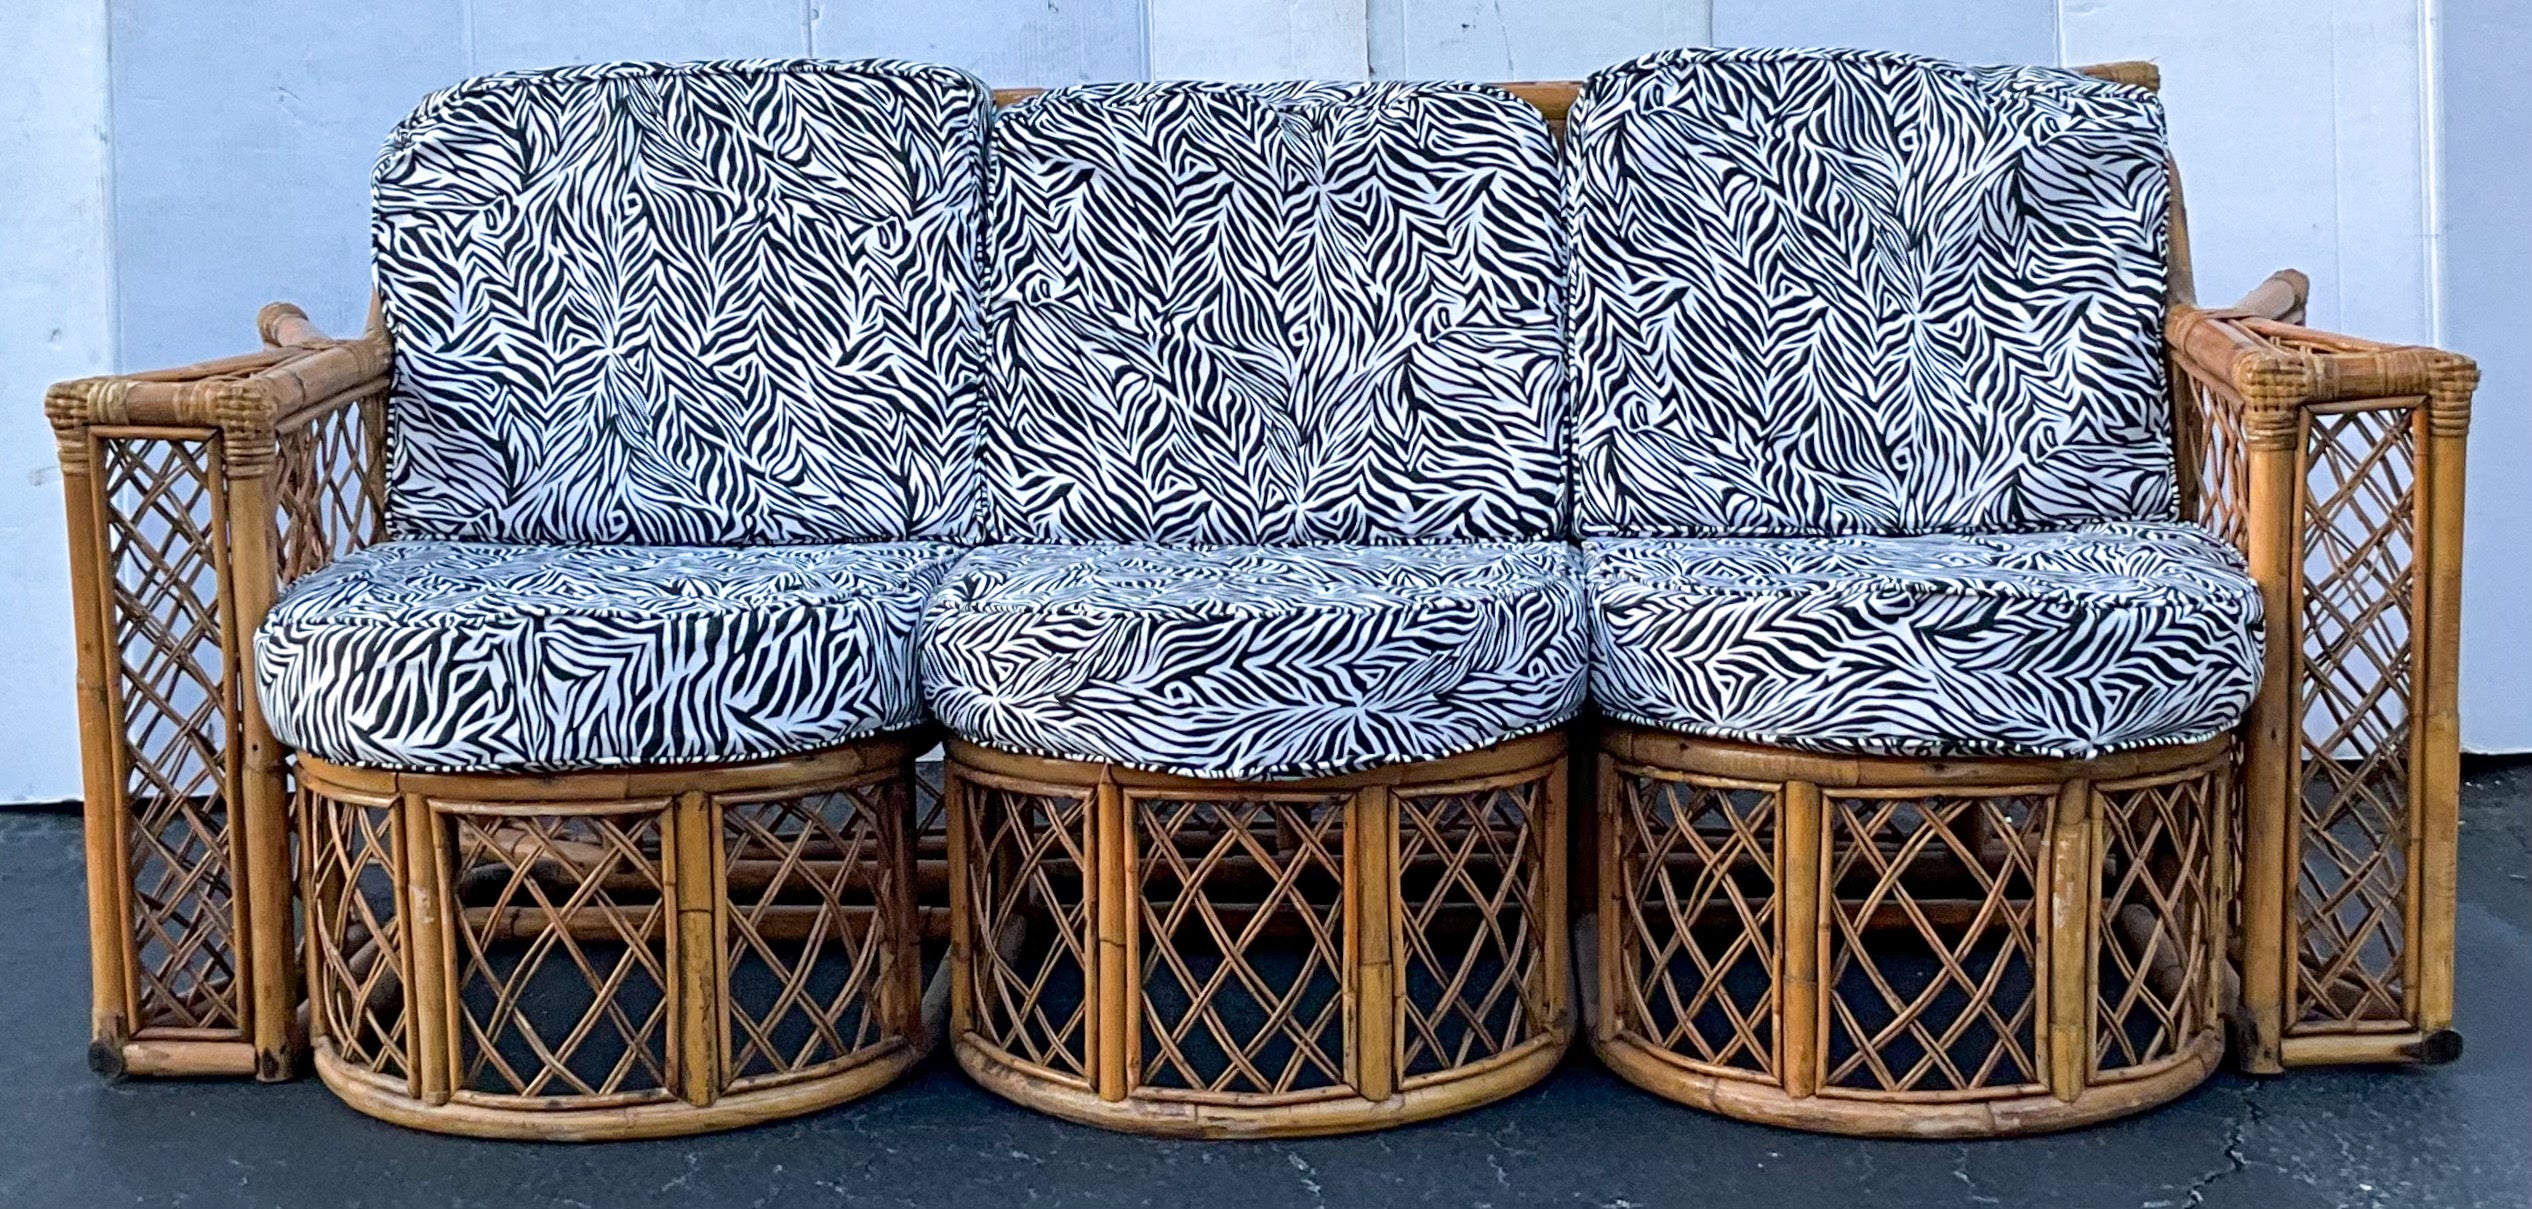 This is a mid-century French bent bamboo sofa in very good condition. The upholstery is a printed zebra cotton. It dates to the 1960s. Discounts will be given for purchasing multiple pieces.